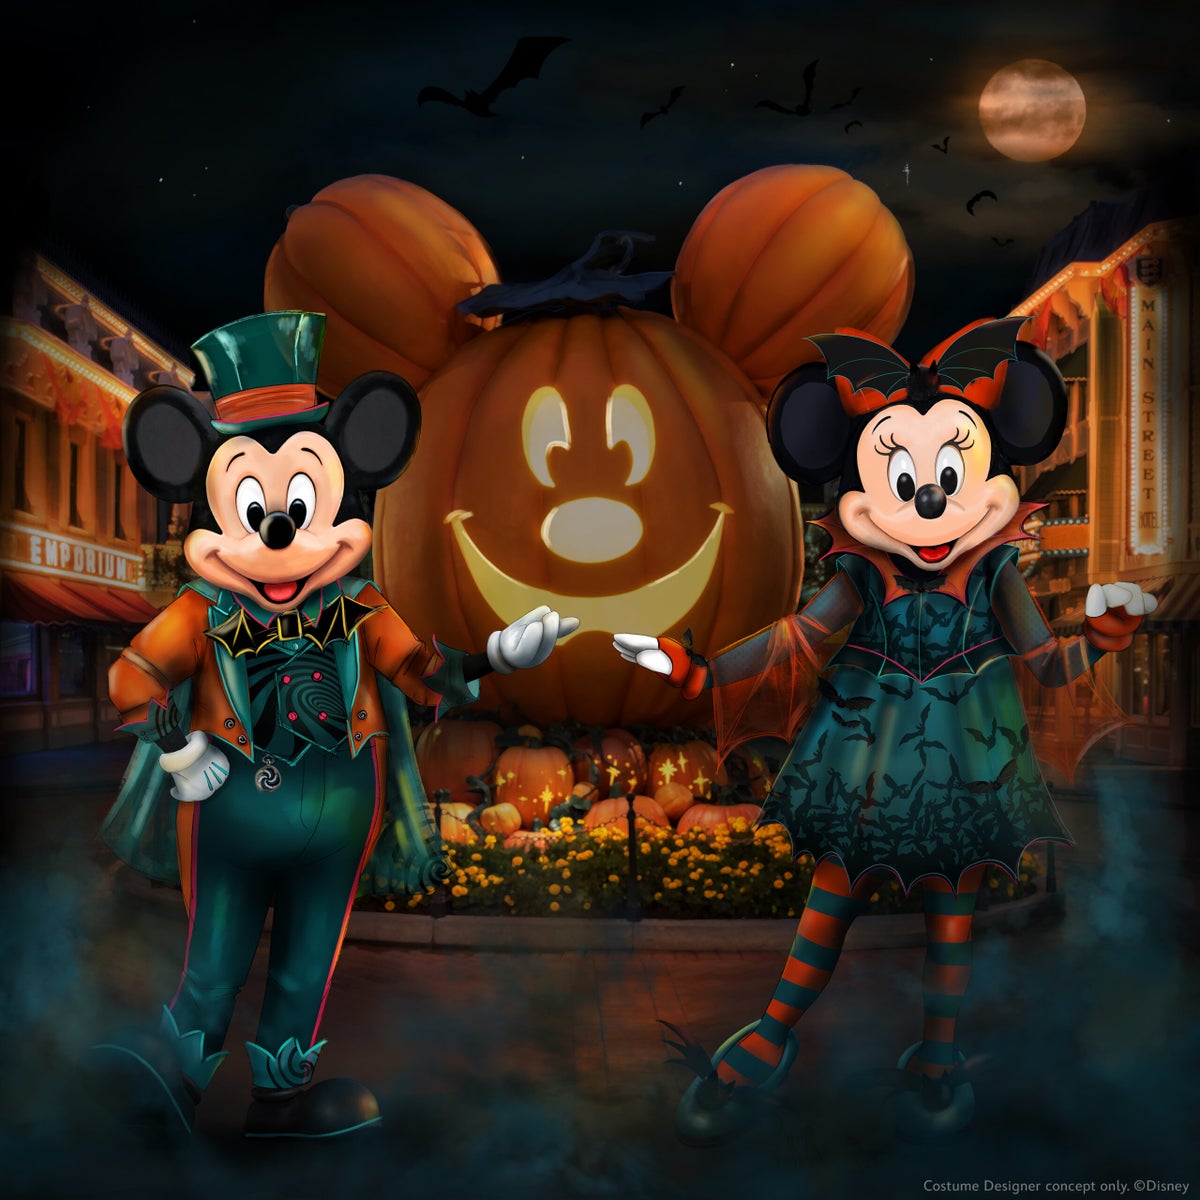 Disney World and Disneyland Halloween party dates and ticket info just